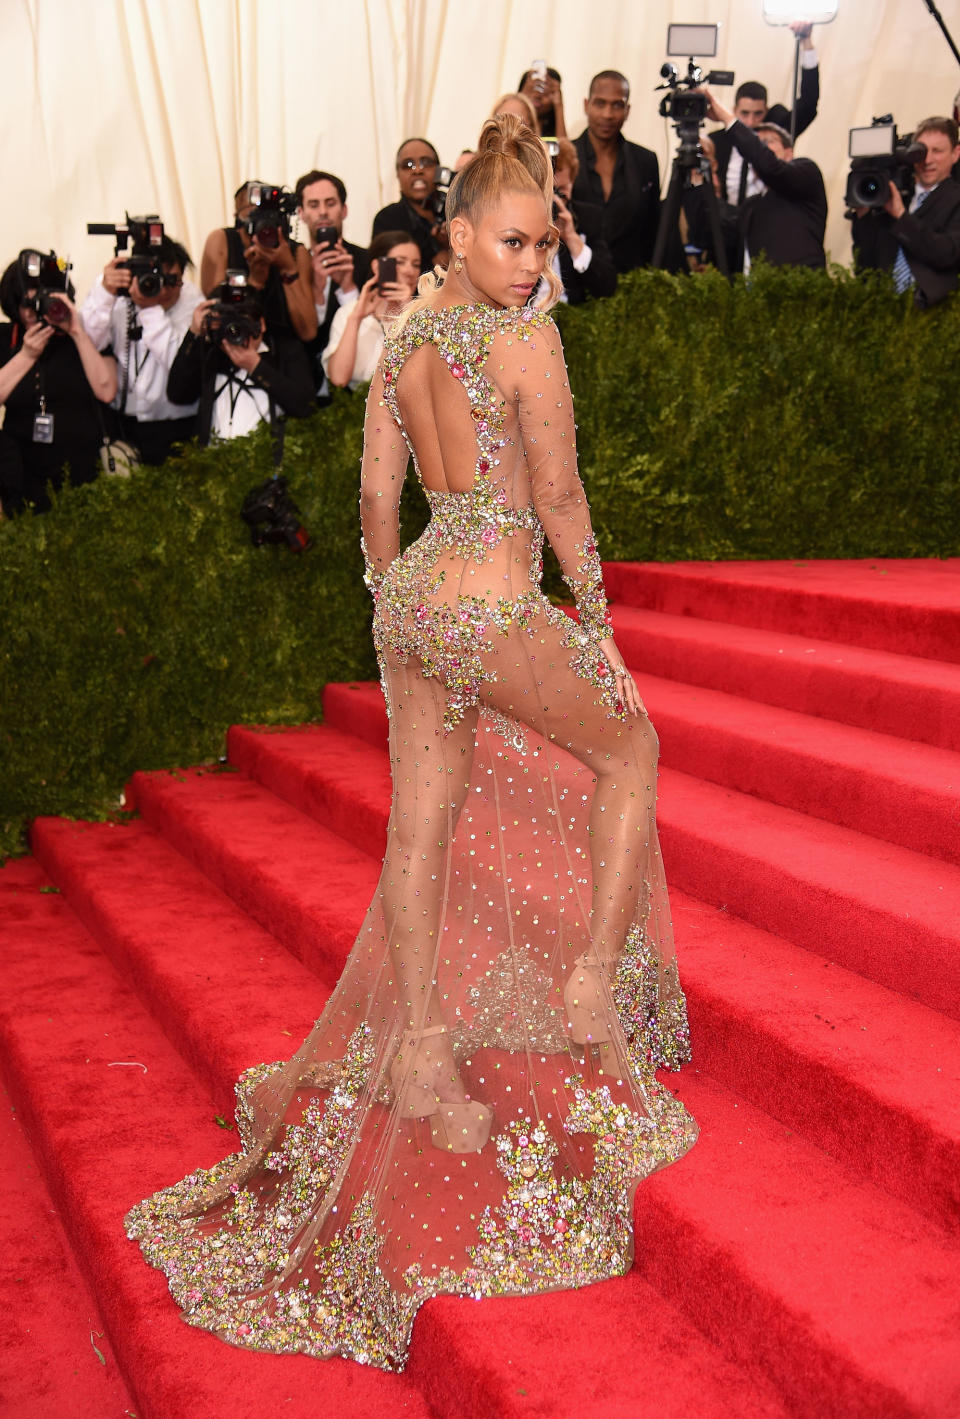 Beyonce at the "China: Through The Looking Glass" Costume Institute Gala in 2015